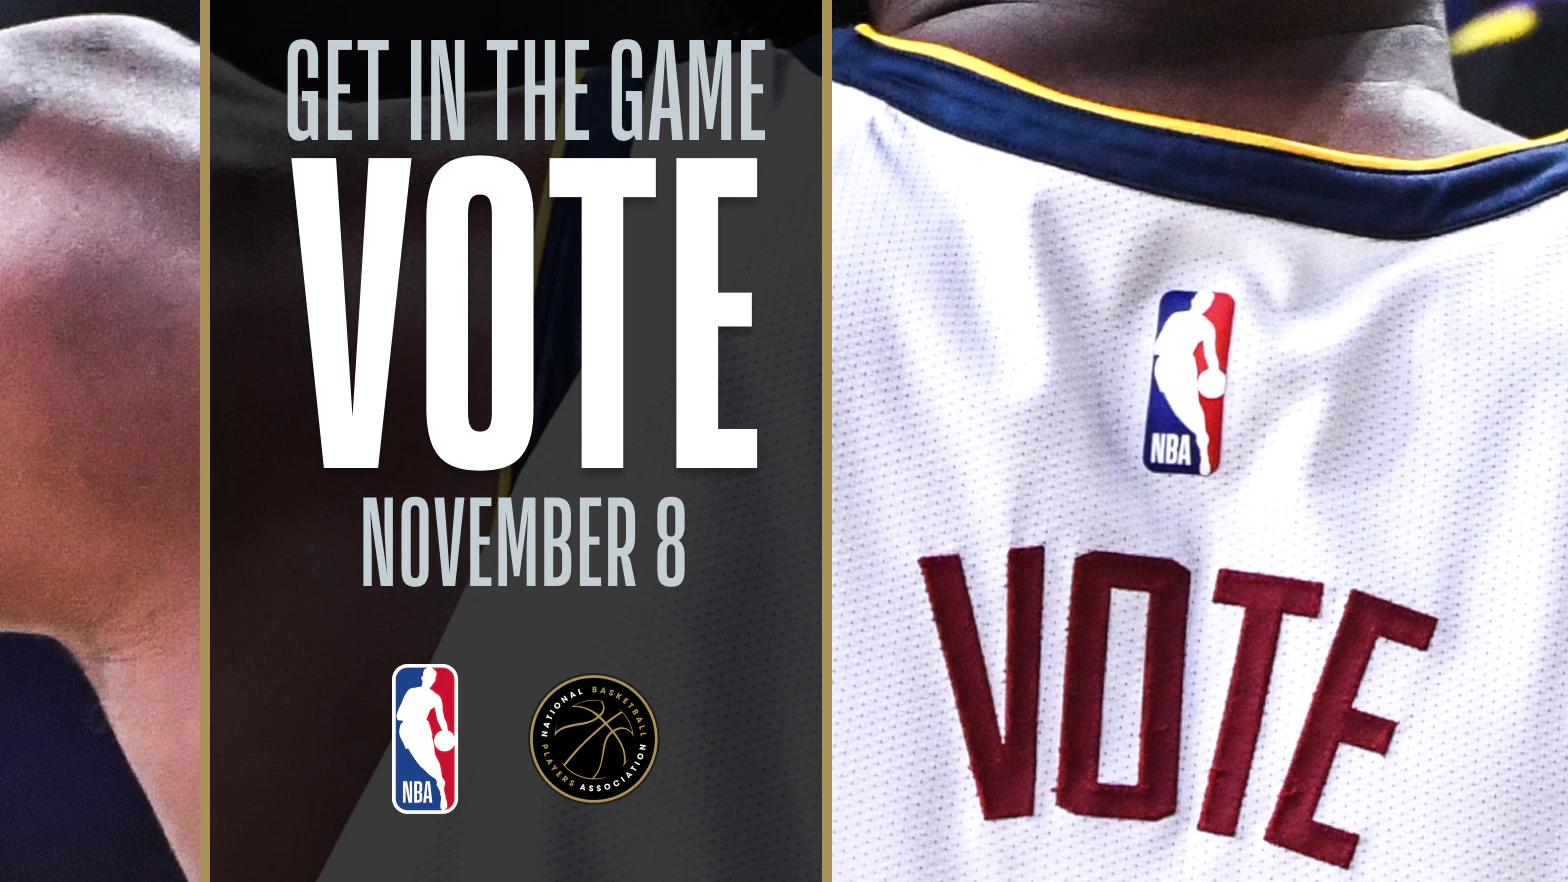 Get in the game:  Vote!